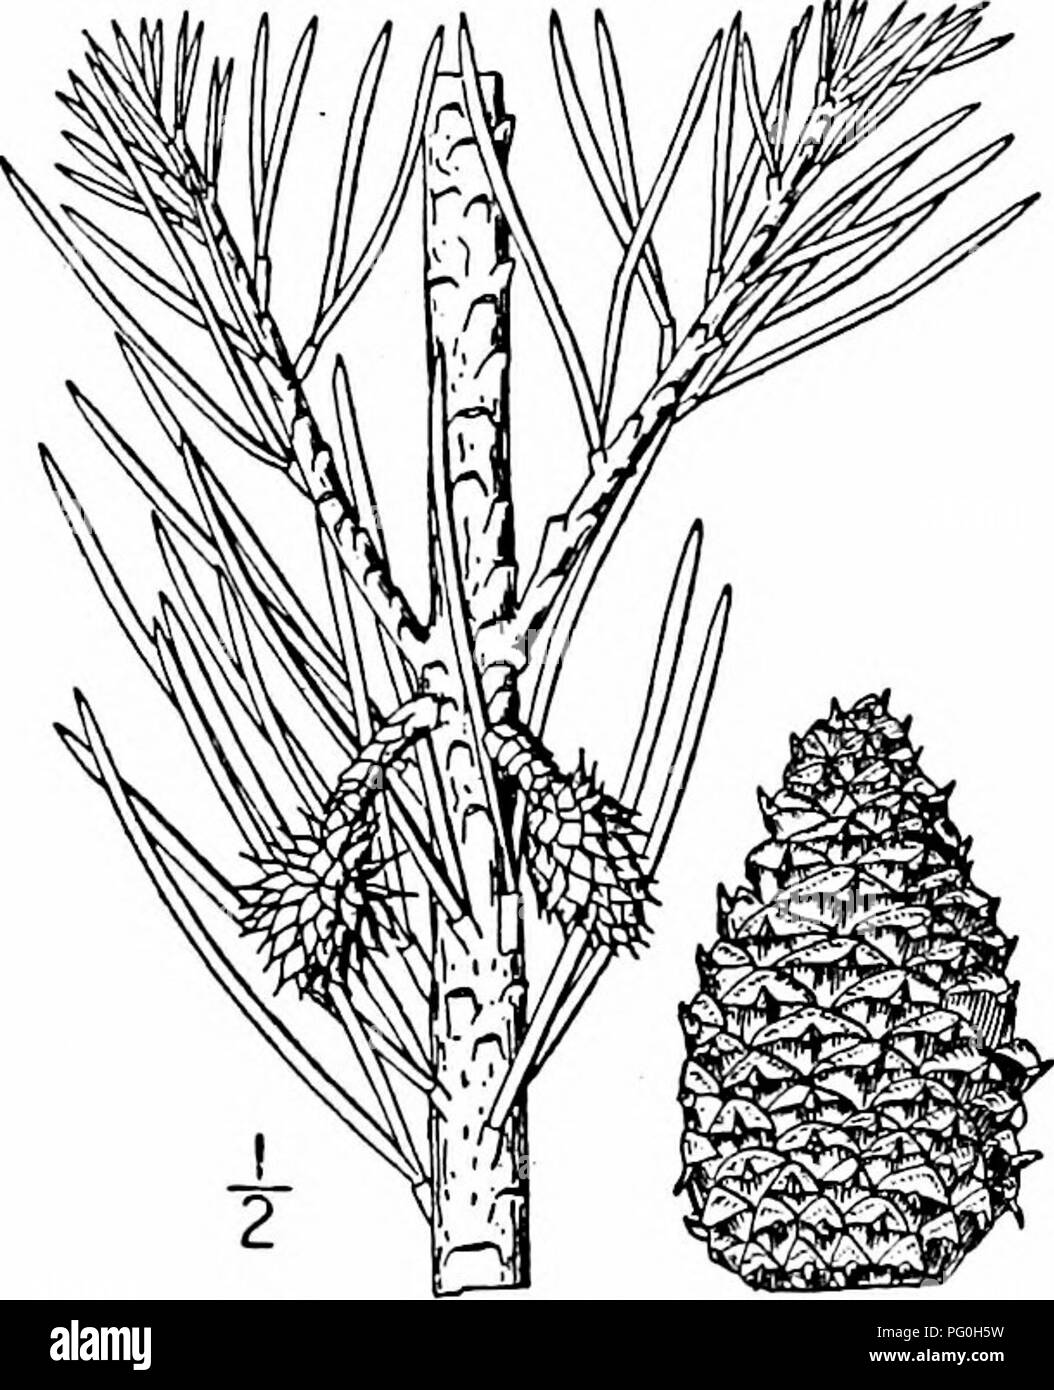 . North American trees : being descriptions and illustrations of the trees growing independently of cultivation in North America, north of Mexico and the West Indies . Trees. 46 The Pines The tree, on account of its rapid growth, is very valuable in regions 6i shifting sand, as a binder of the soil. It is also known as Old field pine, Spruce pine, Scrub pine, and Florida spruce pine. 34. JERSEY PINE — Pinus virginiana Miller Pinus inops Alton This tree grows in poor rocky or sandy soil from southern New York to In- diana, southward to Georgia and Alabama, is very abundant in Maryland and Virgi Stock Photo